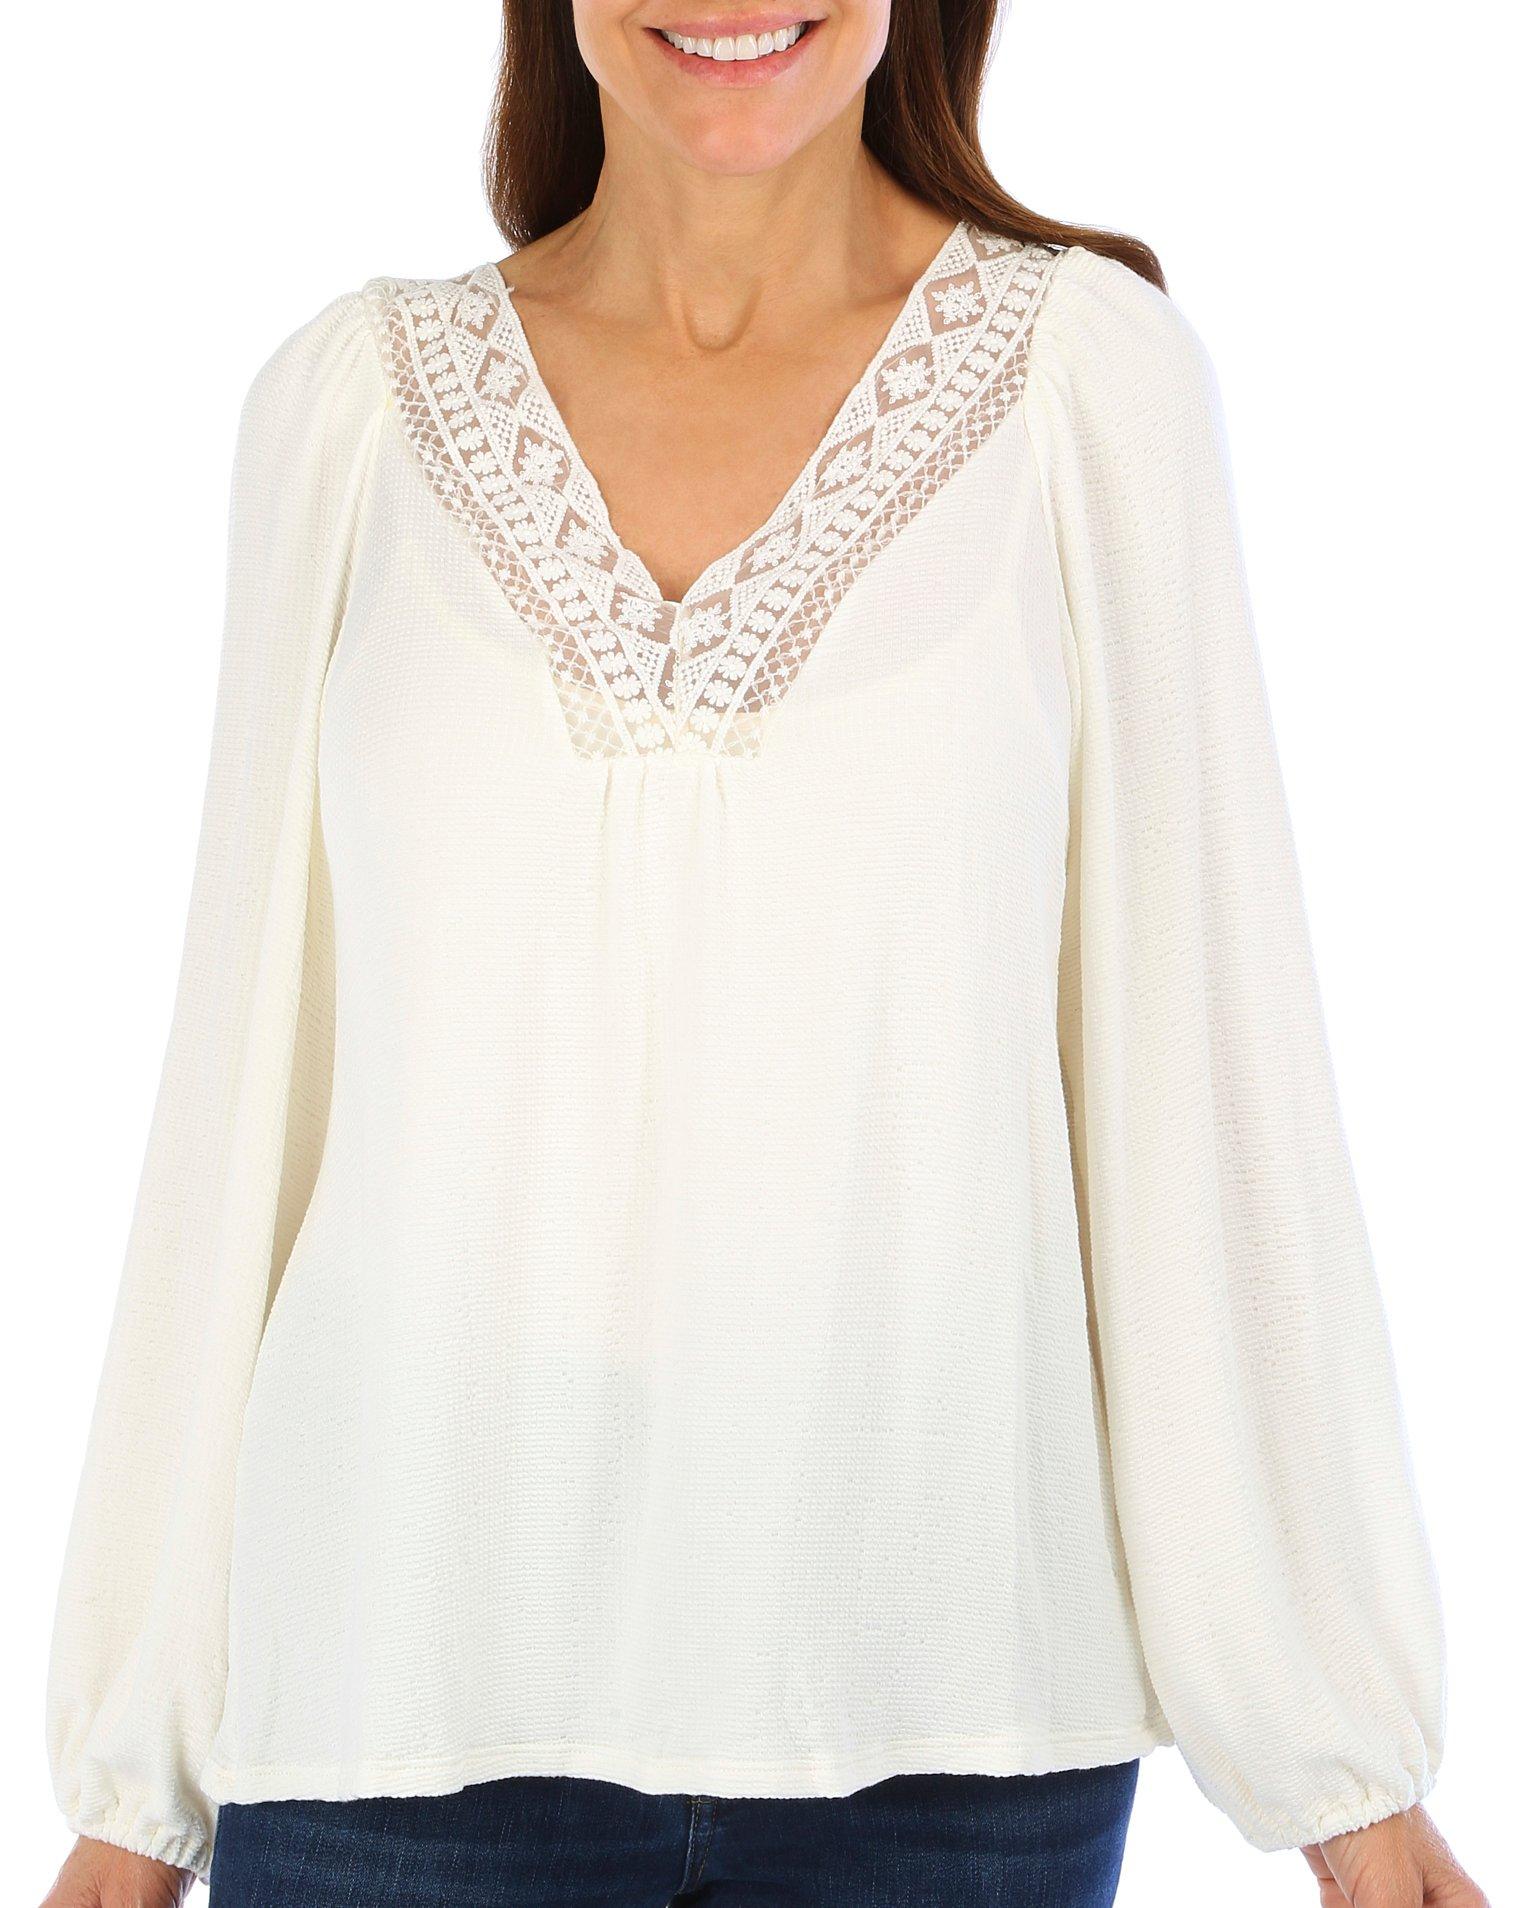 Above & Beyond Womens Lace Trimmed V-Neck Long